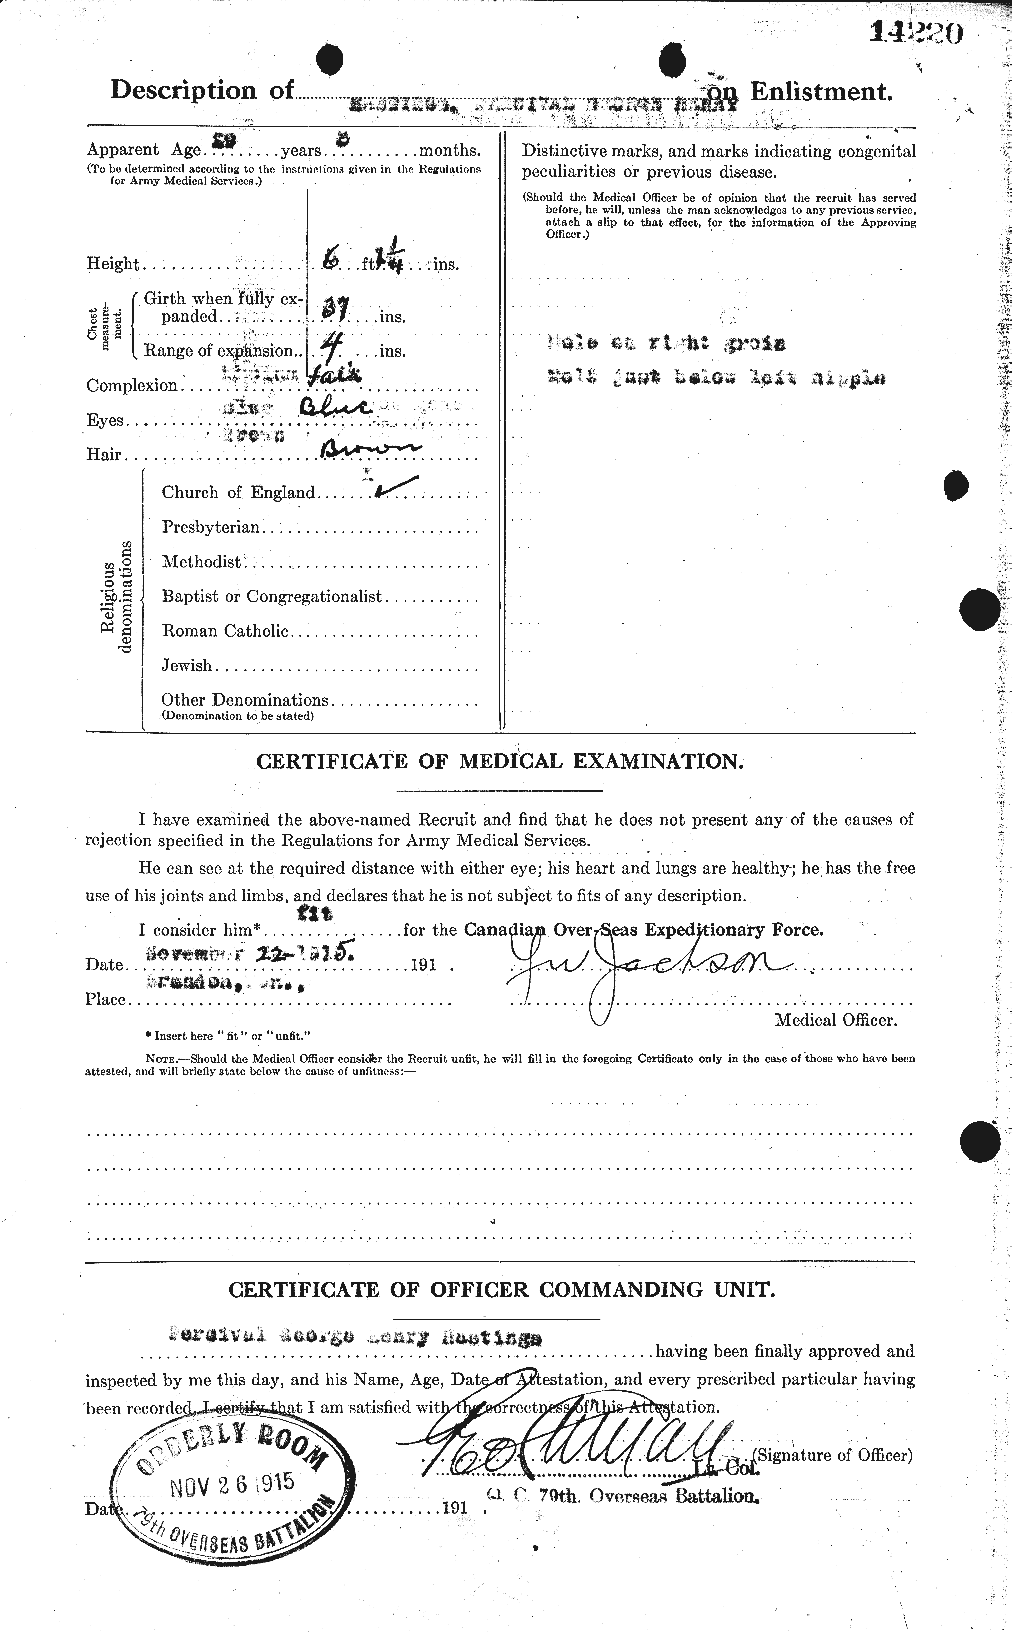 Personnel Records of the First World War - CEF 388239b